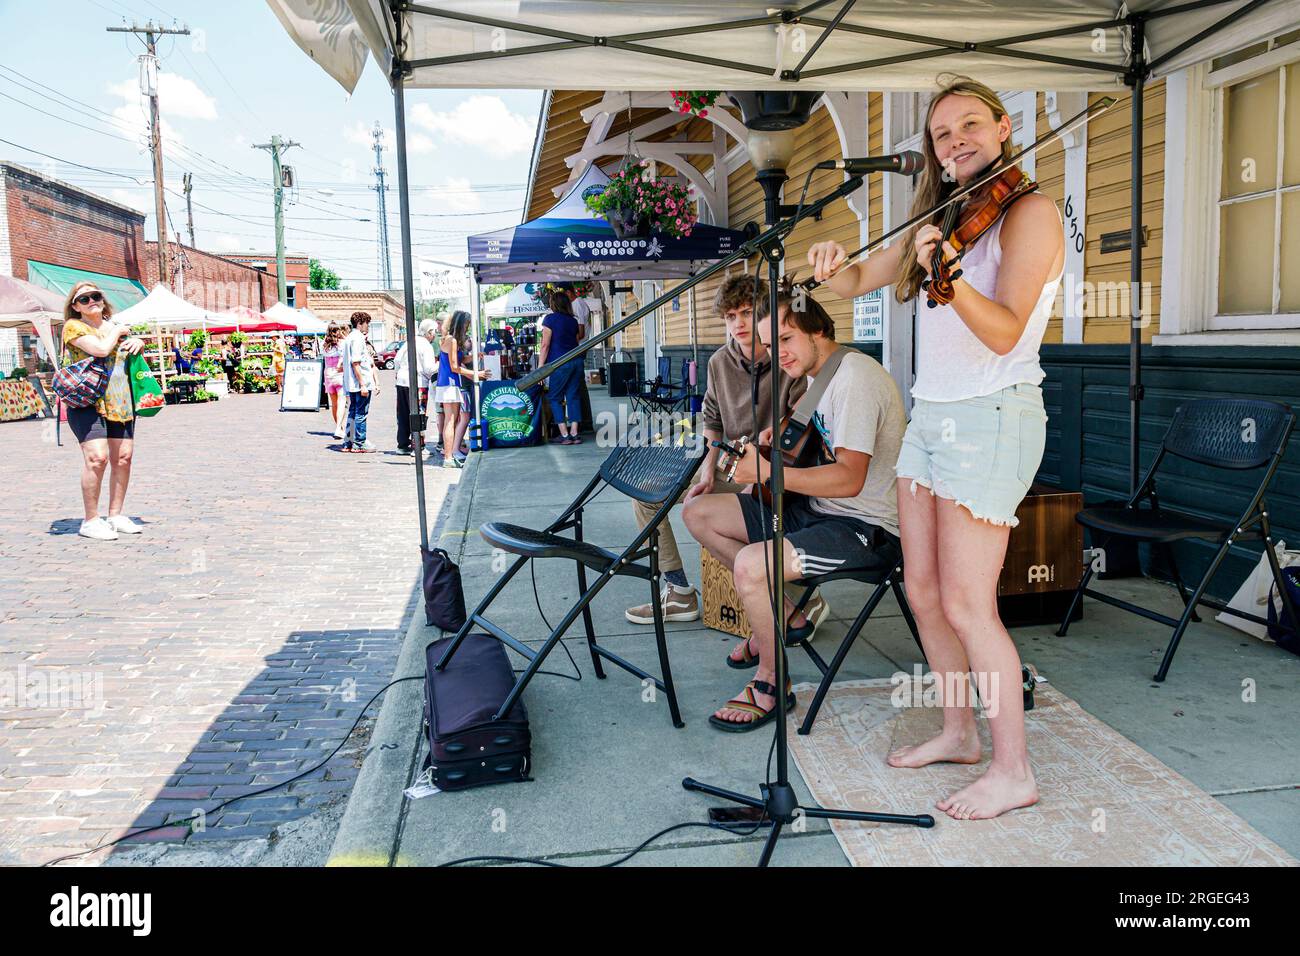 Hendersonville North Carolina,Hendersonville Farmers Market,Maple Street,stage free live entertainment mountain music musicians playing fiddle guitar, Stock Photo